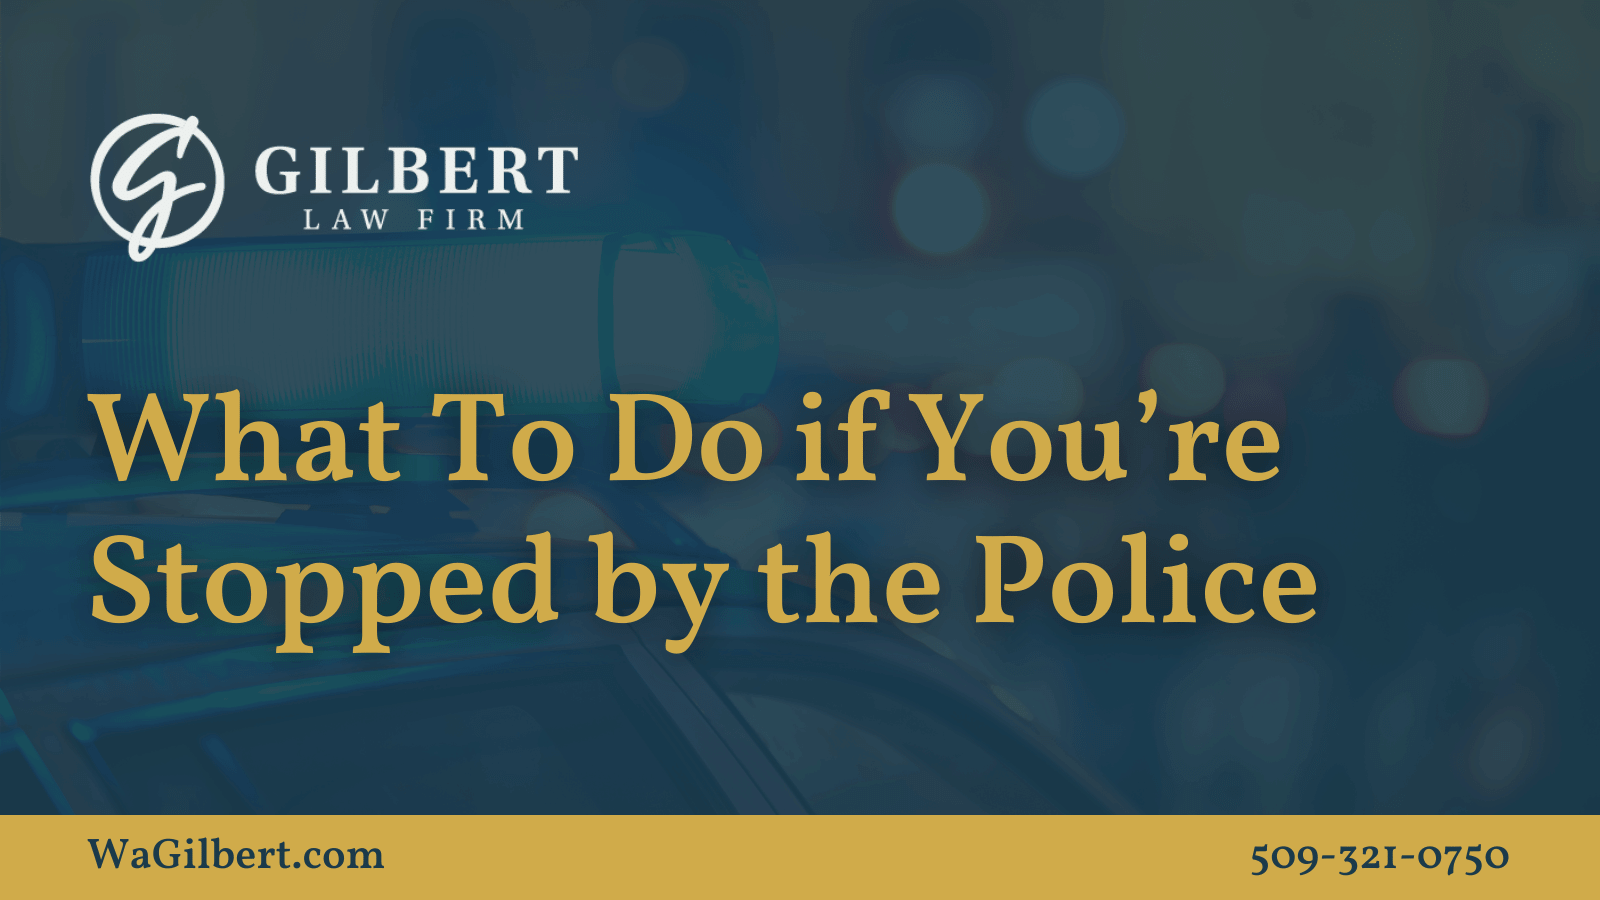 What To Do if You’re Stopped By Police - Gilbert Law Firm Spokane Washington